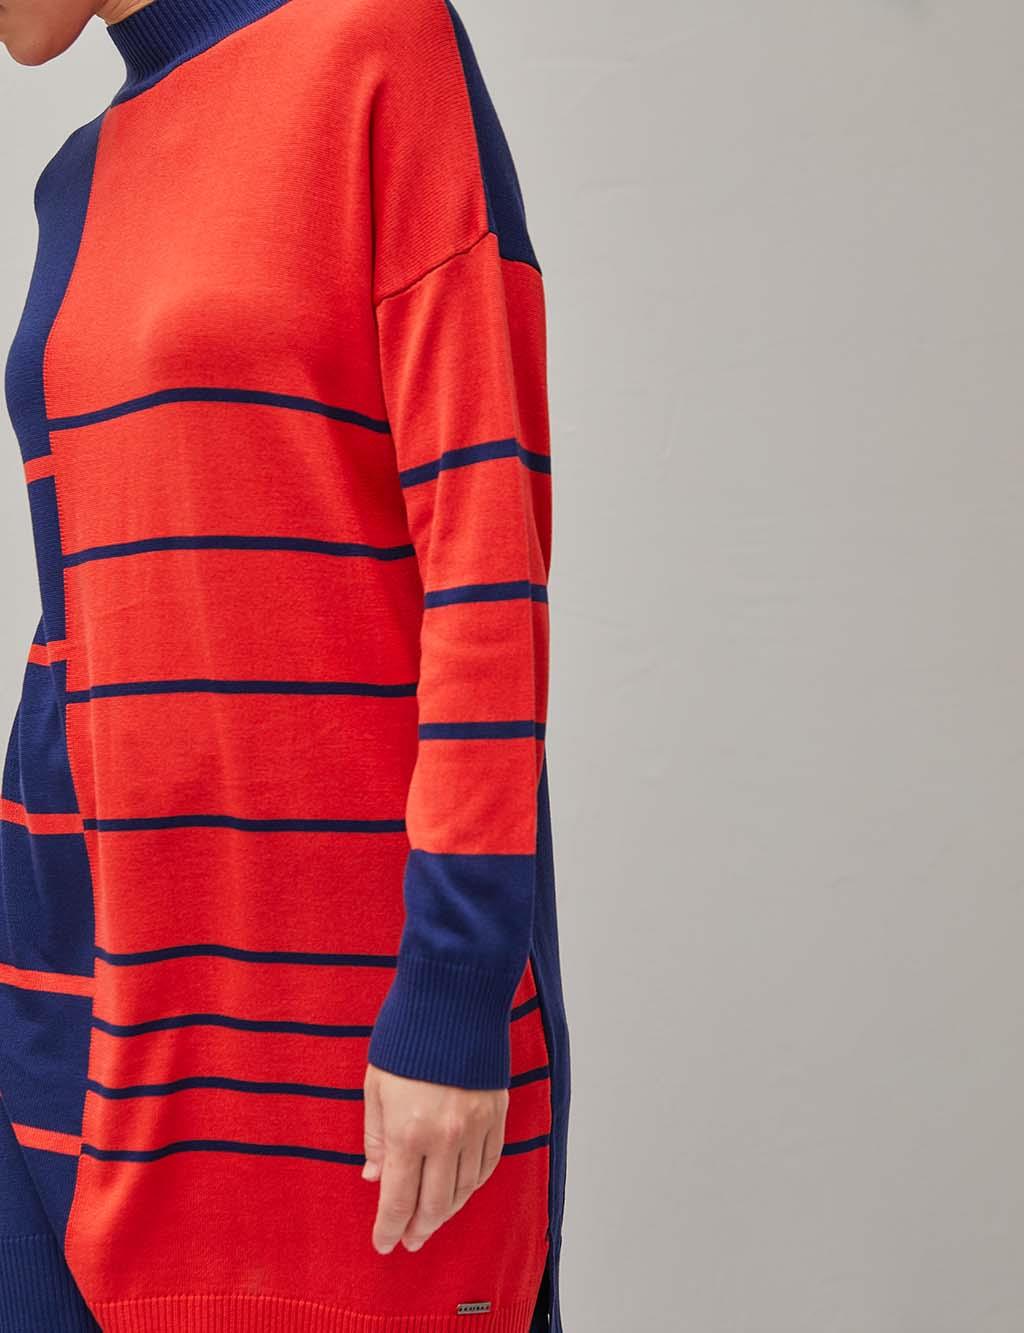 Colorful Striped Knitwear Tunic Navy